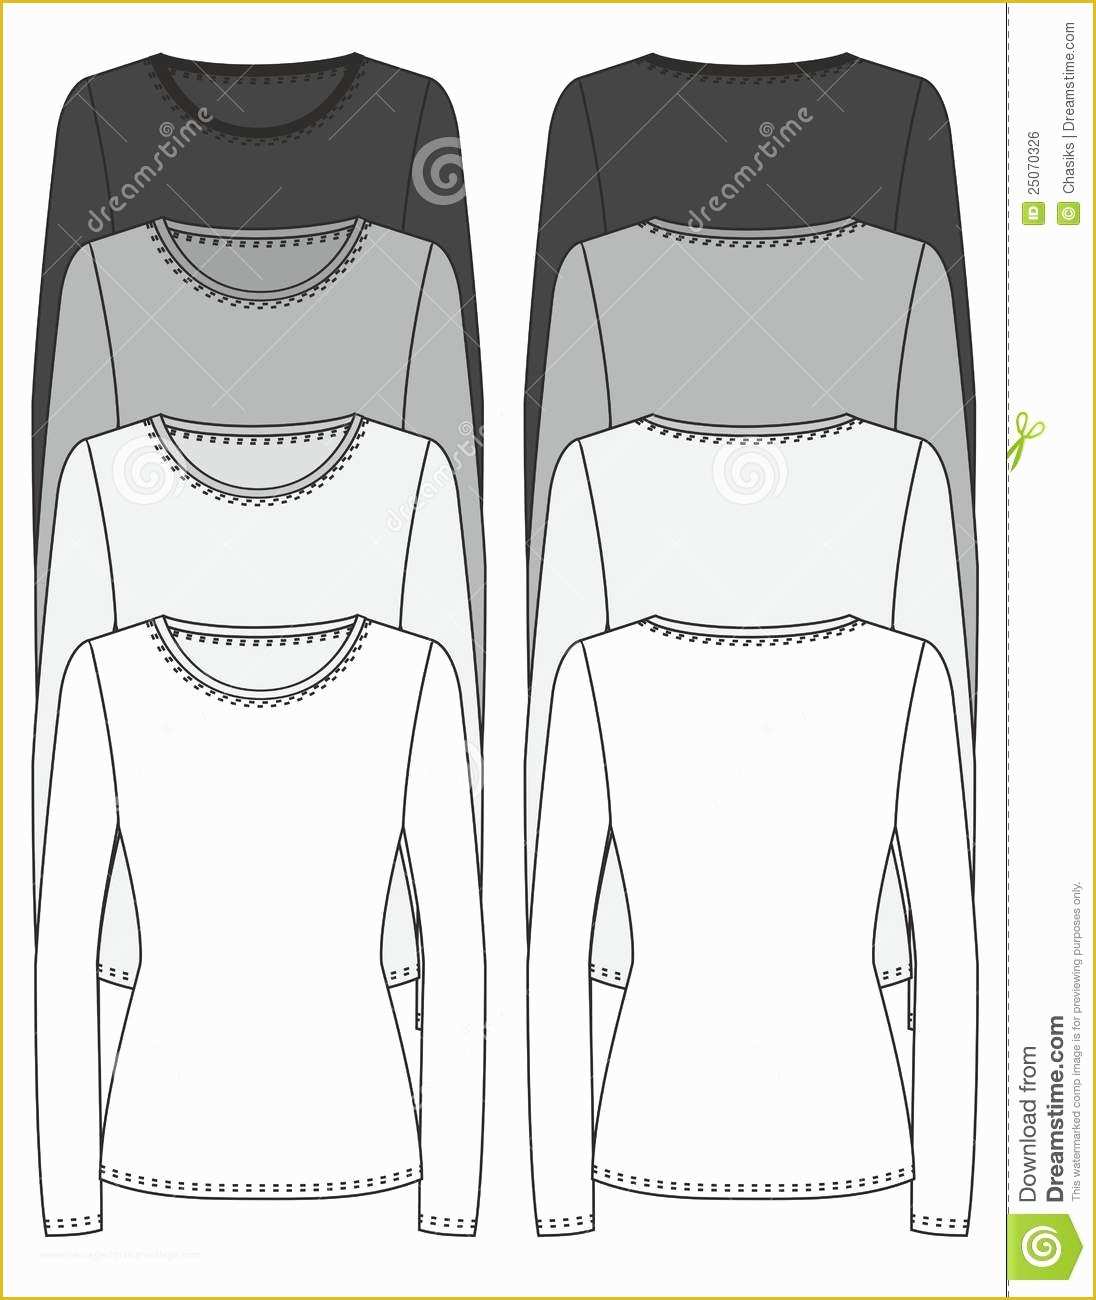 Free Long Sleeve Shirt Template Of Long Sleeved T Shirt Design Template Royalty Free Stock